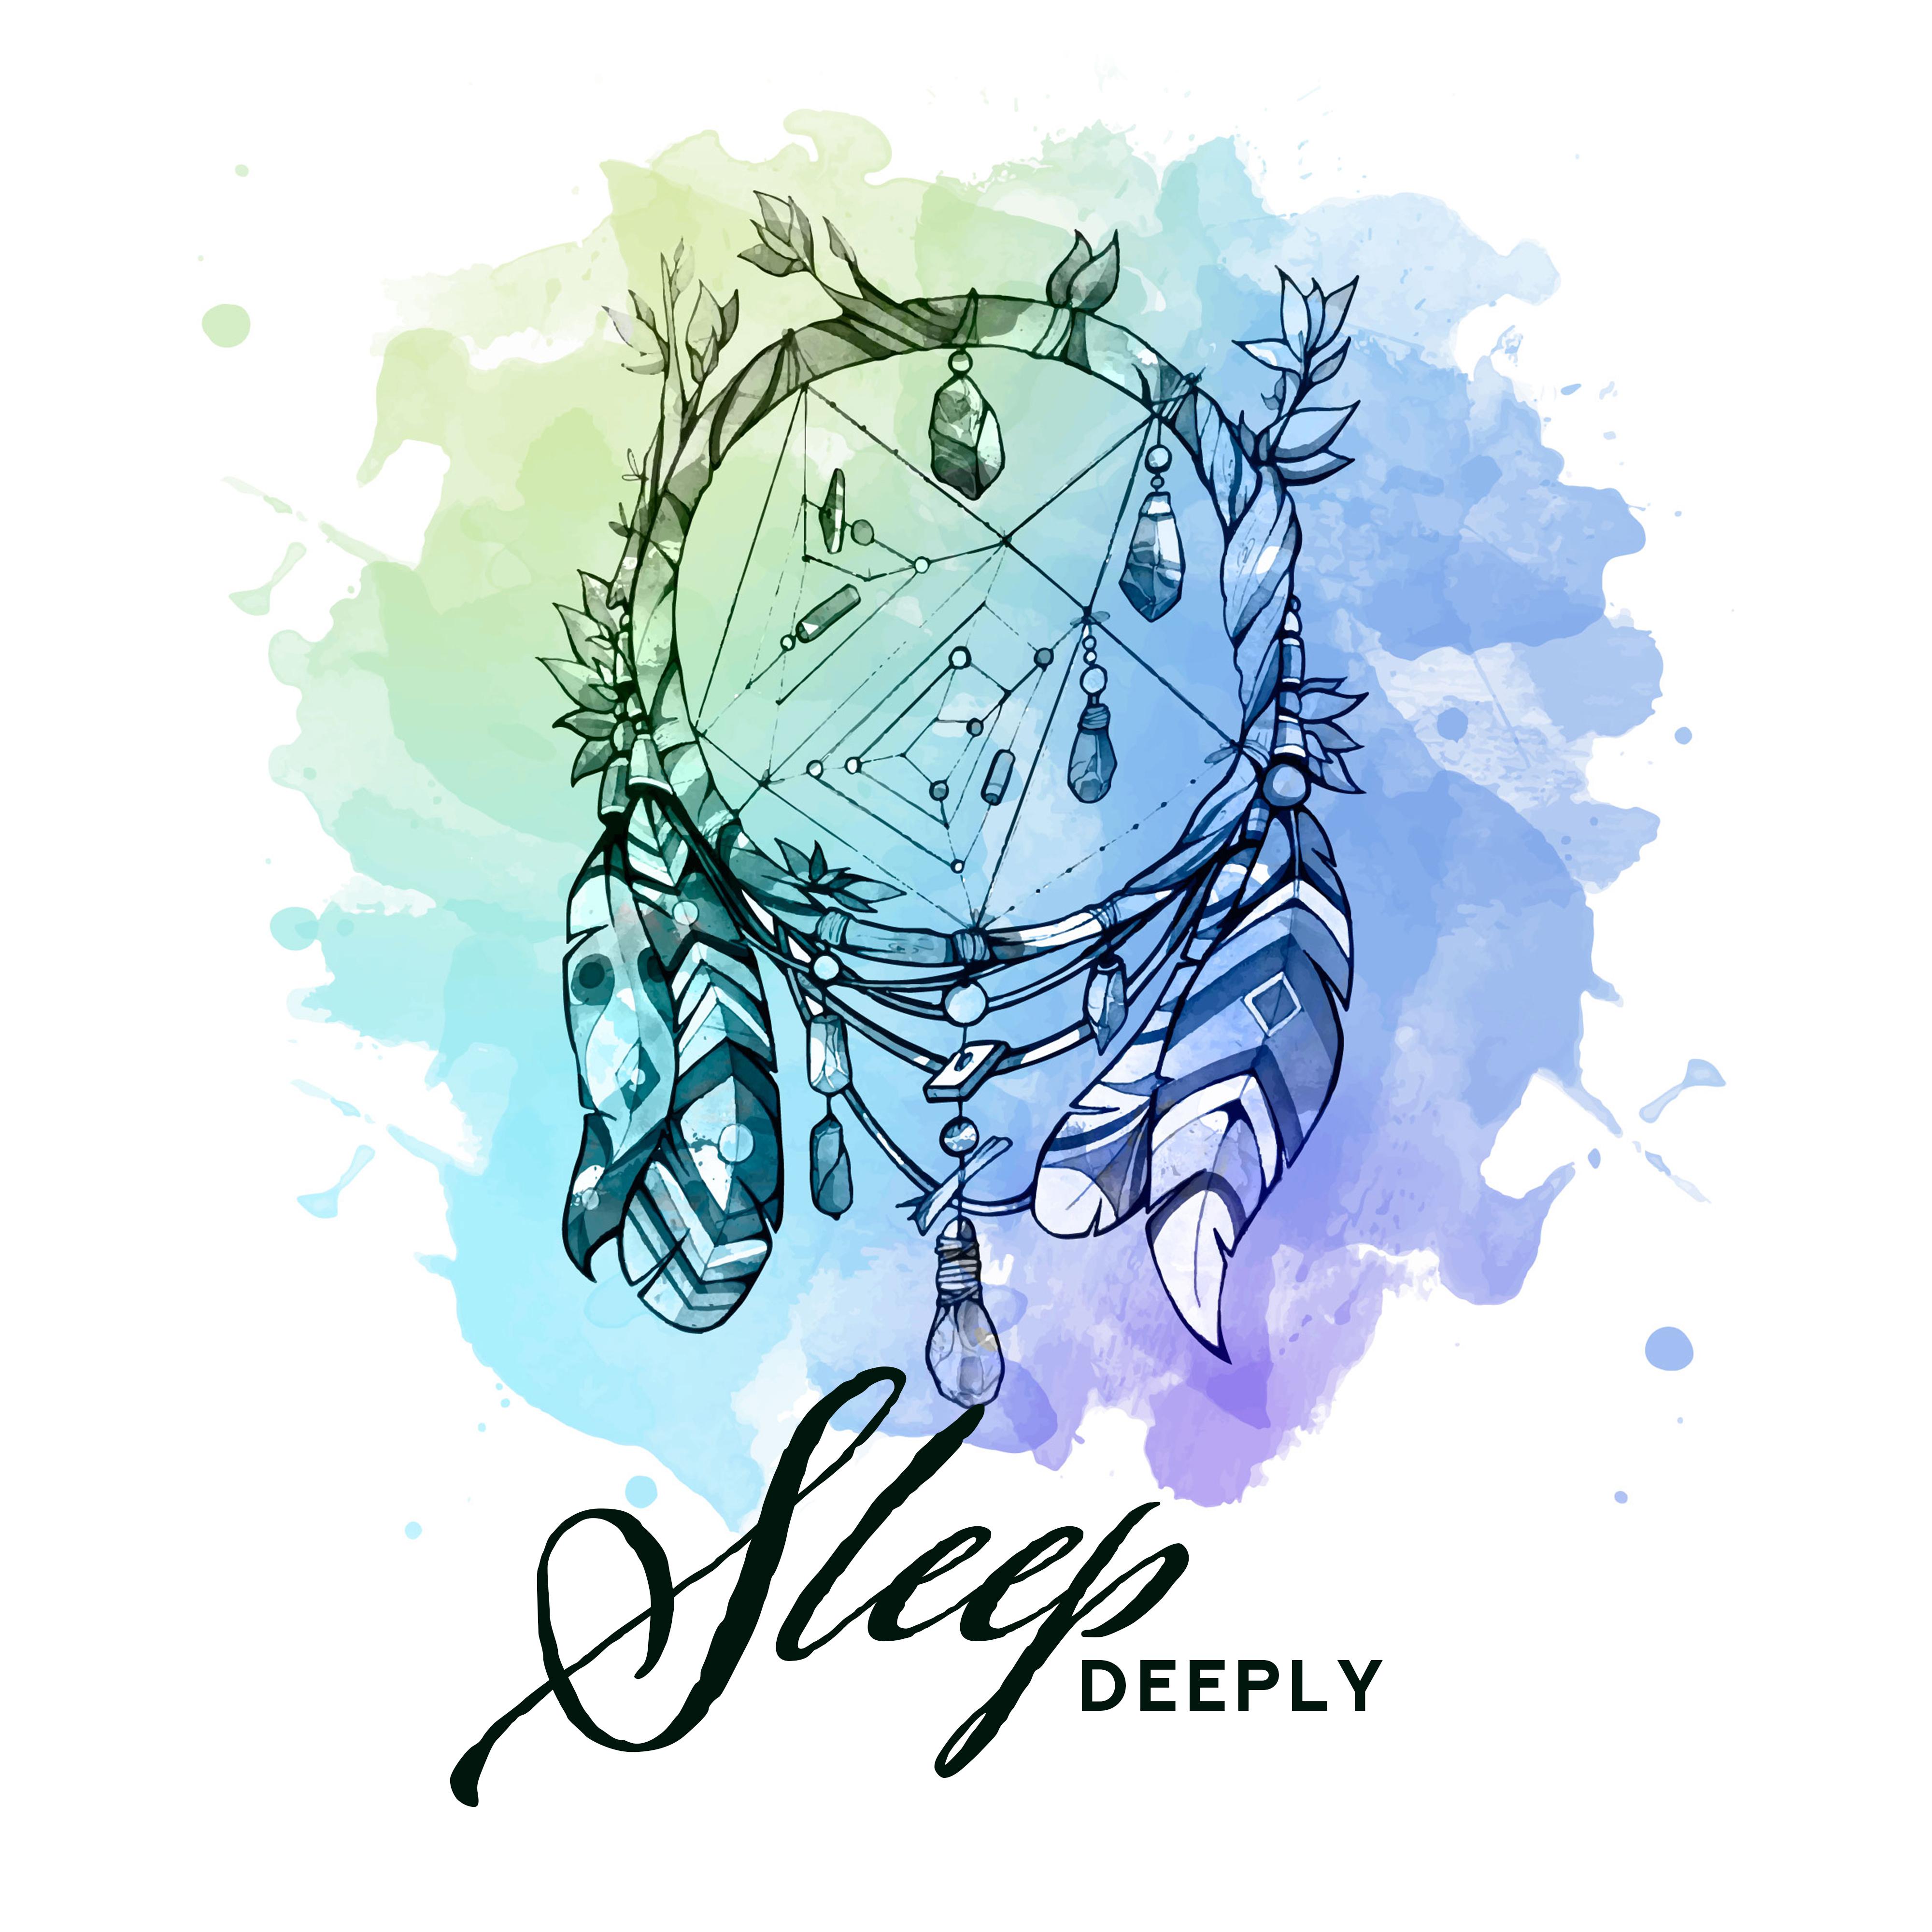 Sleep Deeply - Musical Help to Facilitate Falling Asleep and Dreaming, Gentle Sounds of Nature, Delicate New Age Music to Sleep, Remedy for Insomnia